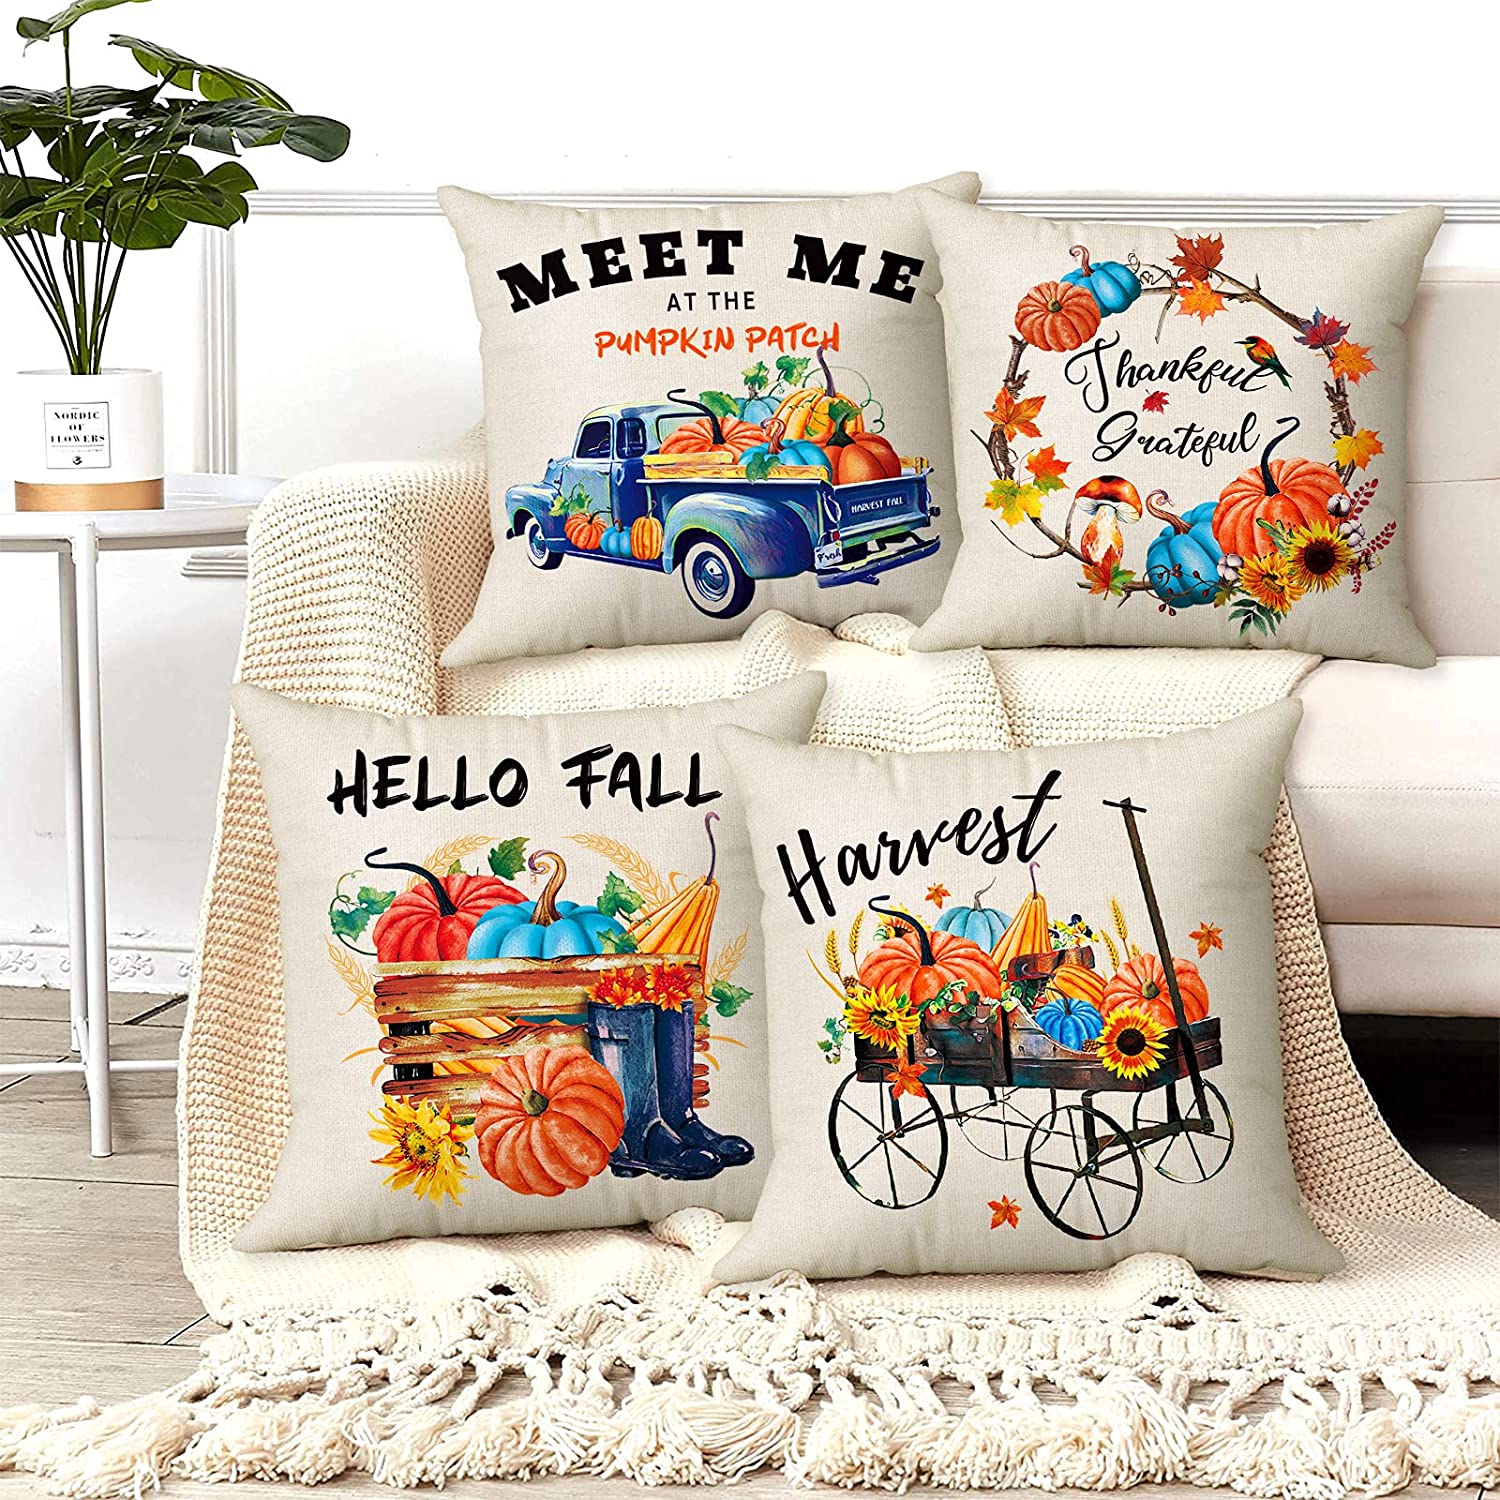 Set of 4 Hello Fall Pillow Covers 18 x 18 with 4 Bonus Coasters (Wreath, Truck)